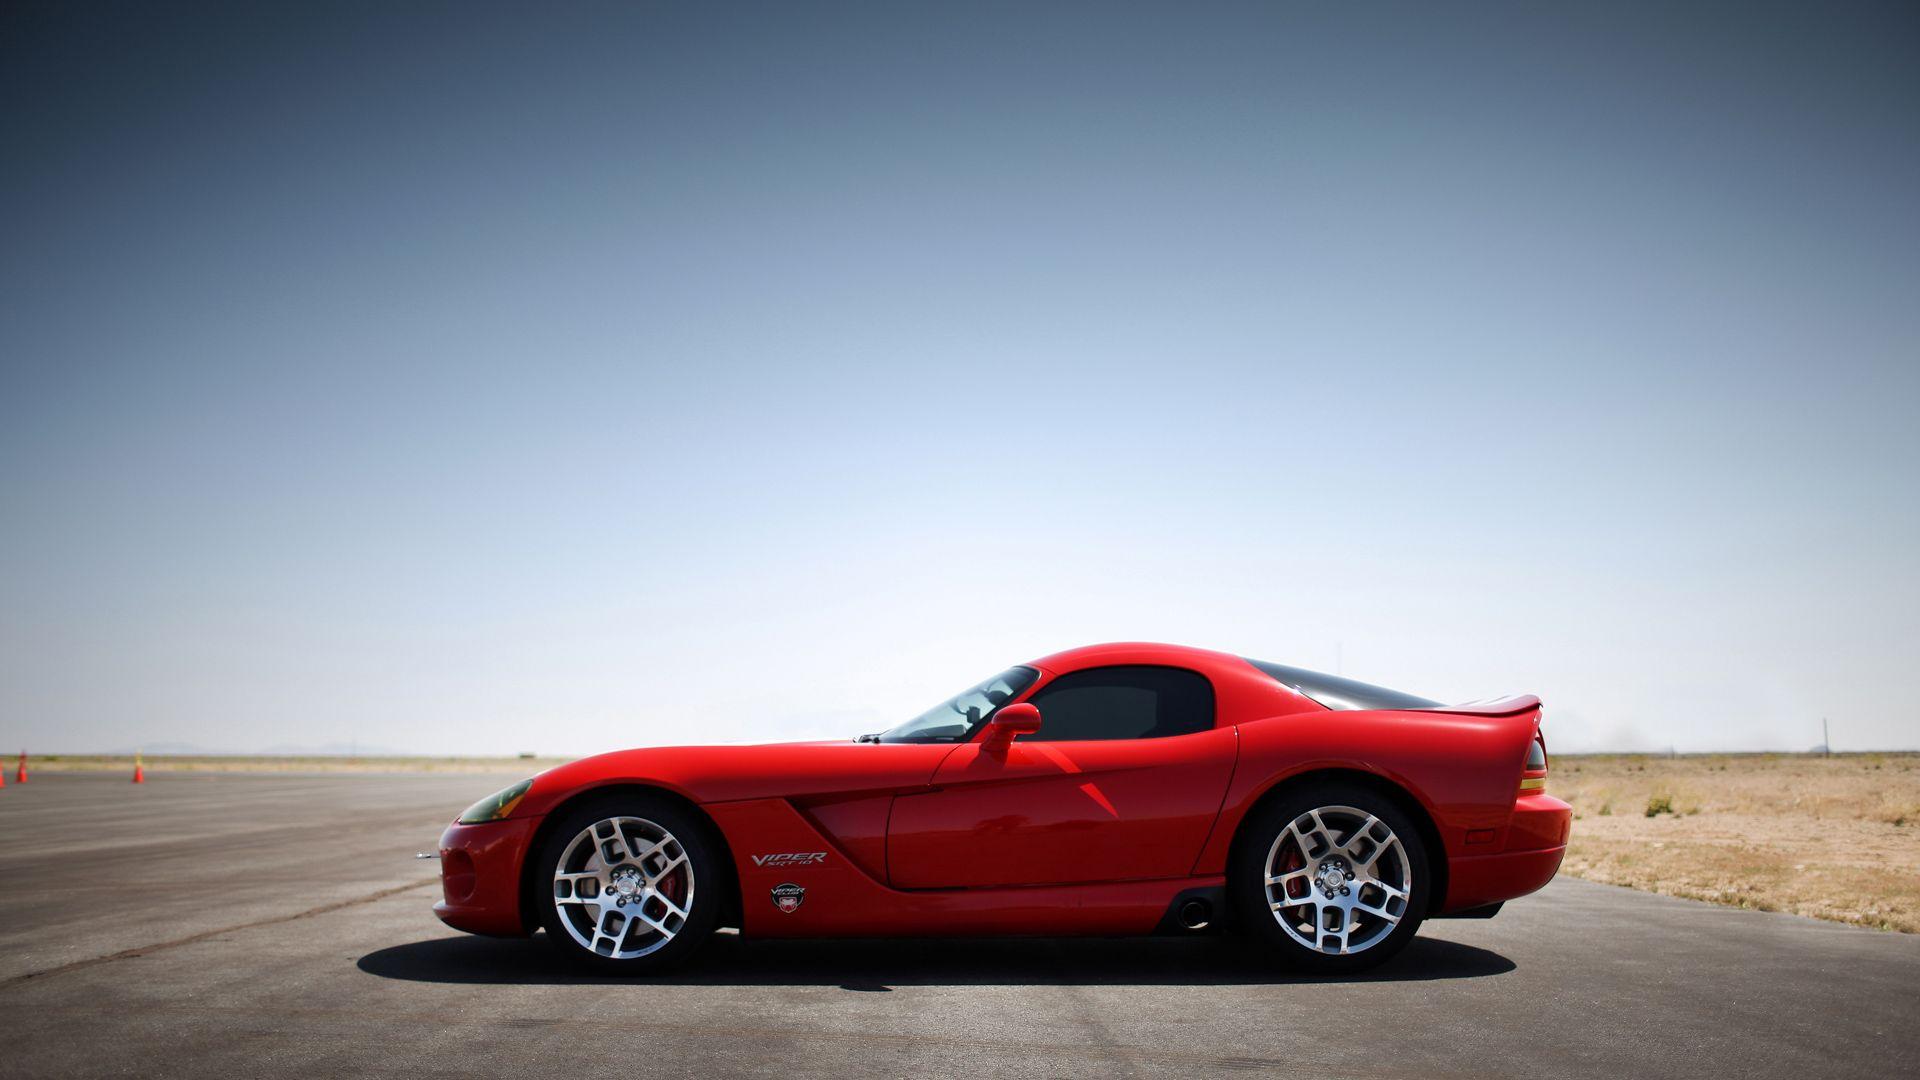 Dodge Viper Wallpaper HD Photo, Wallpaper and other Image